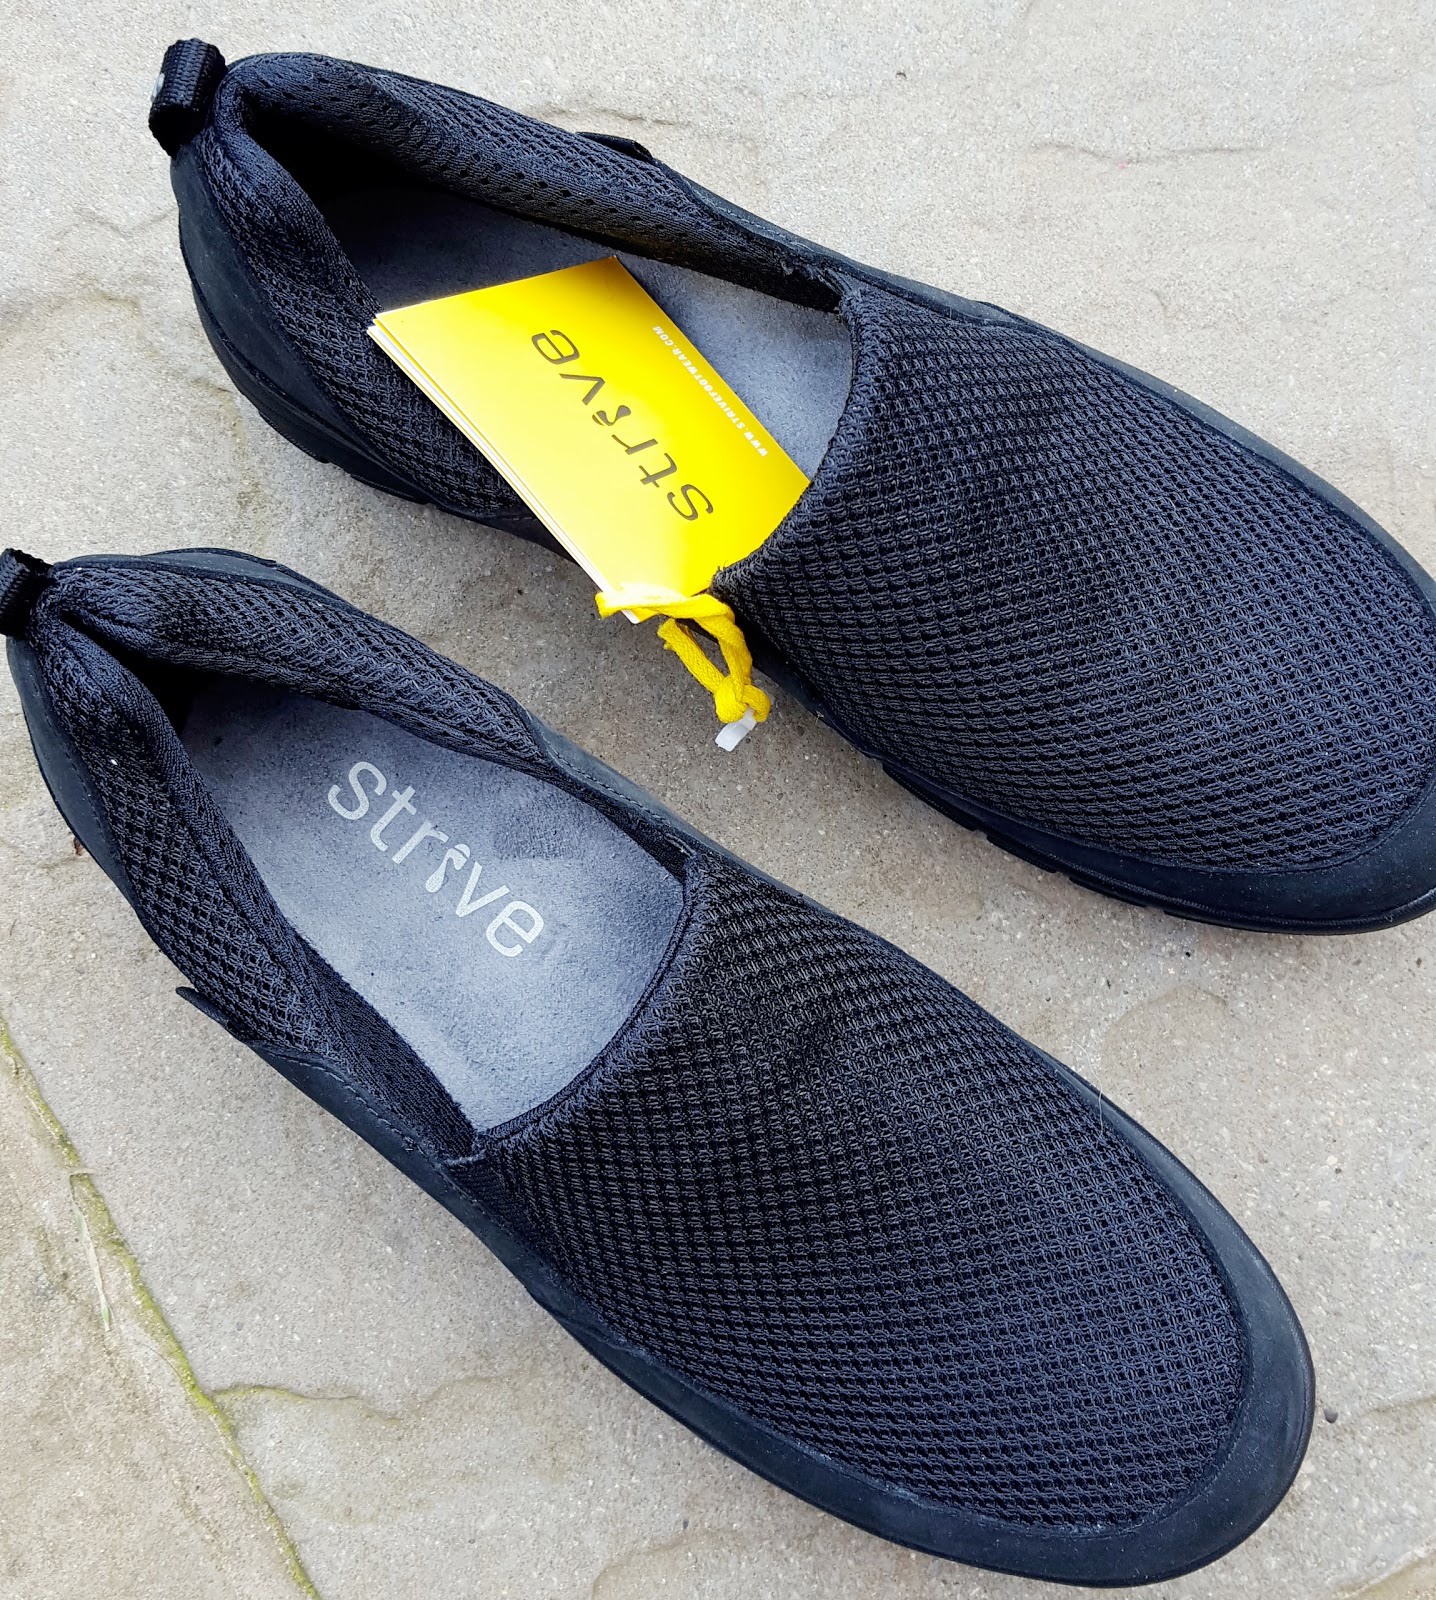 Strive Footwear New AW Collection : Review